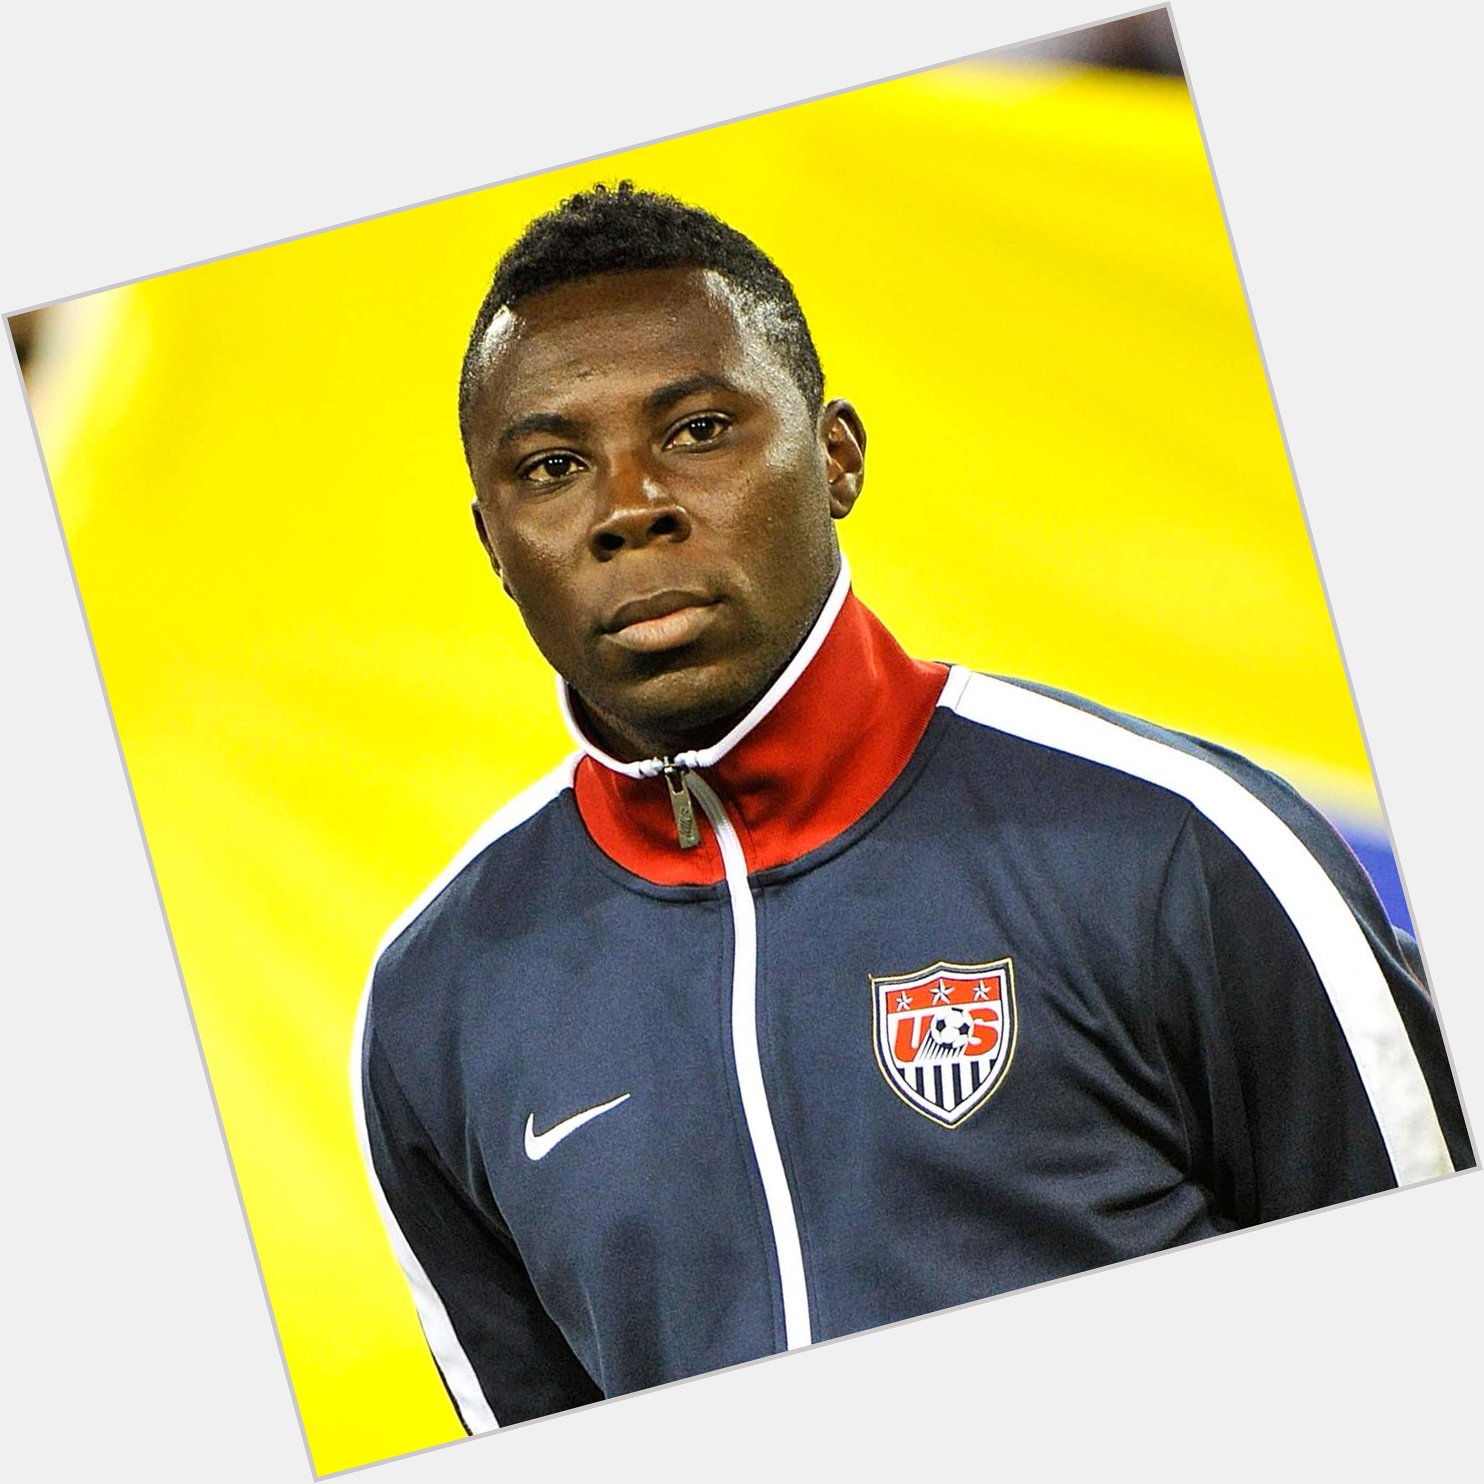 Happy birthday to the man who once had the football world at his feet Freddy Adu, now of KuPS, Finland turns 26 today 